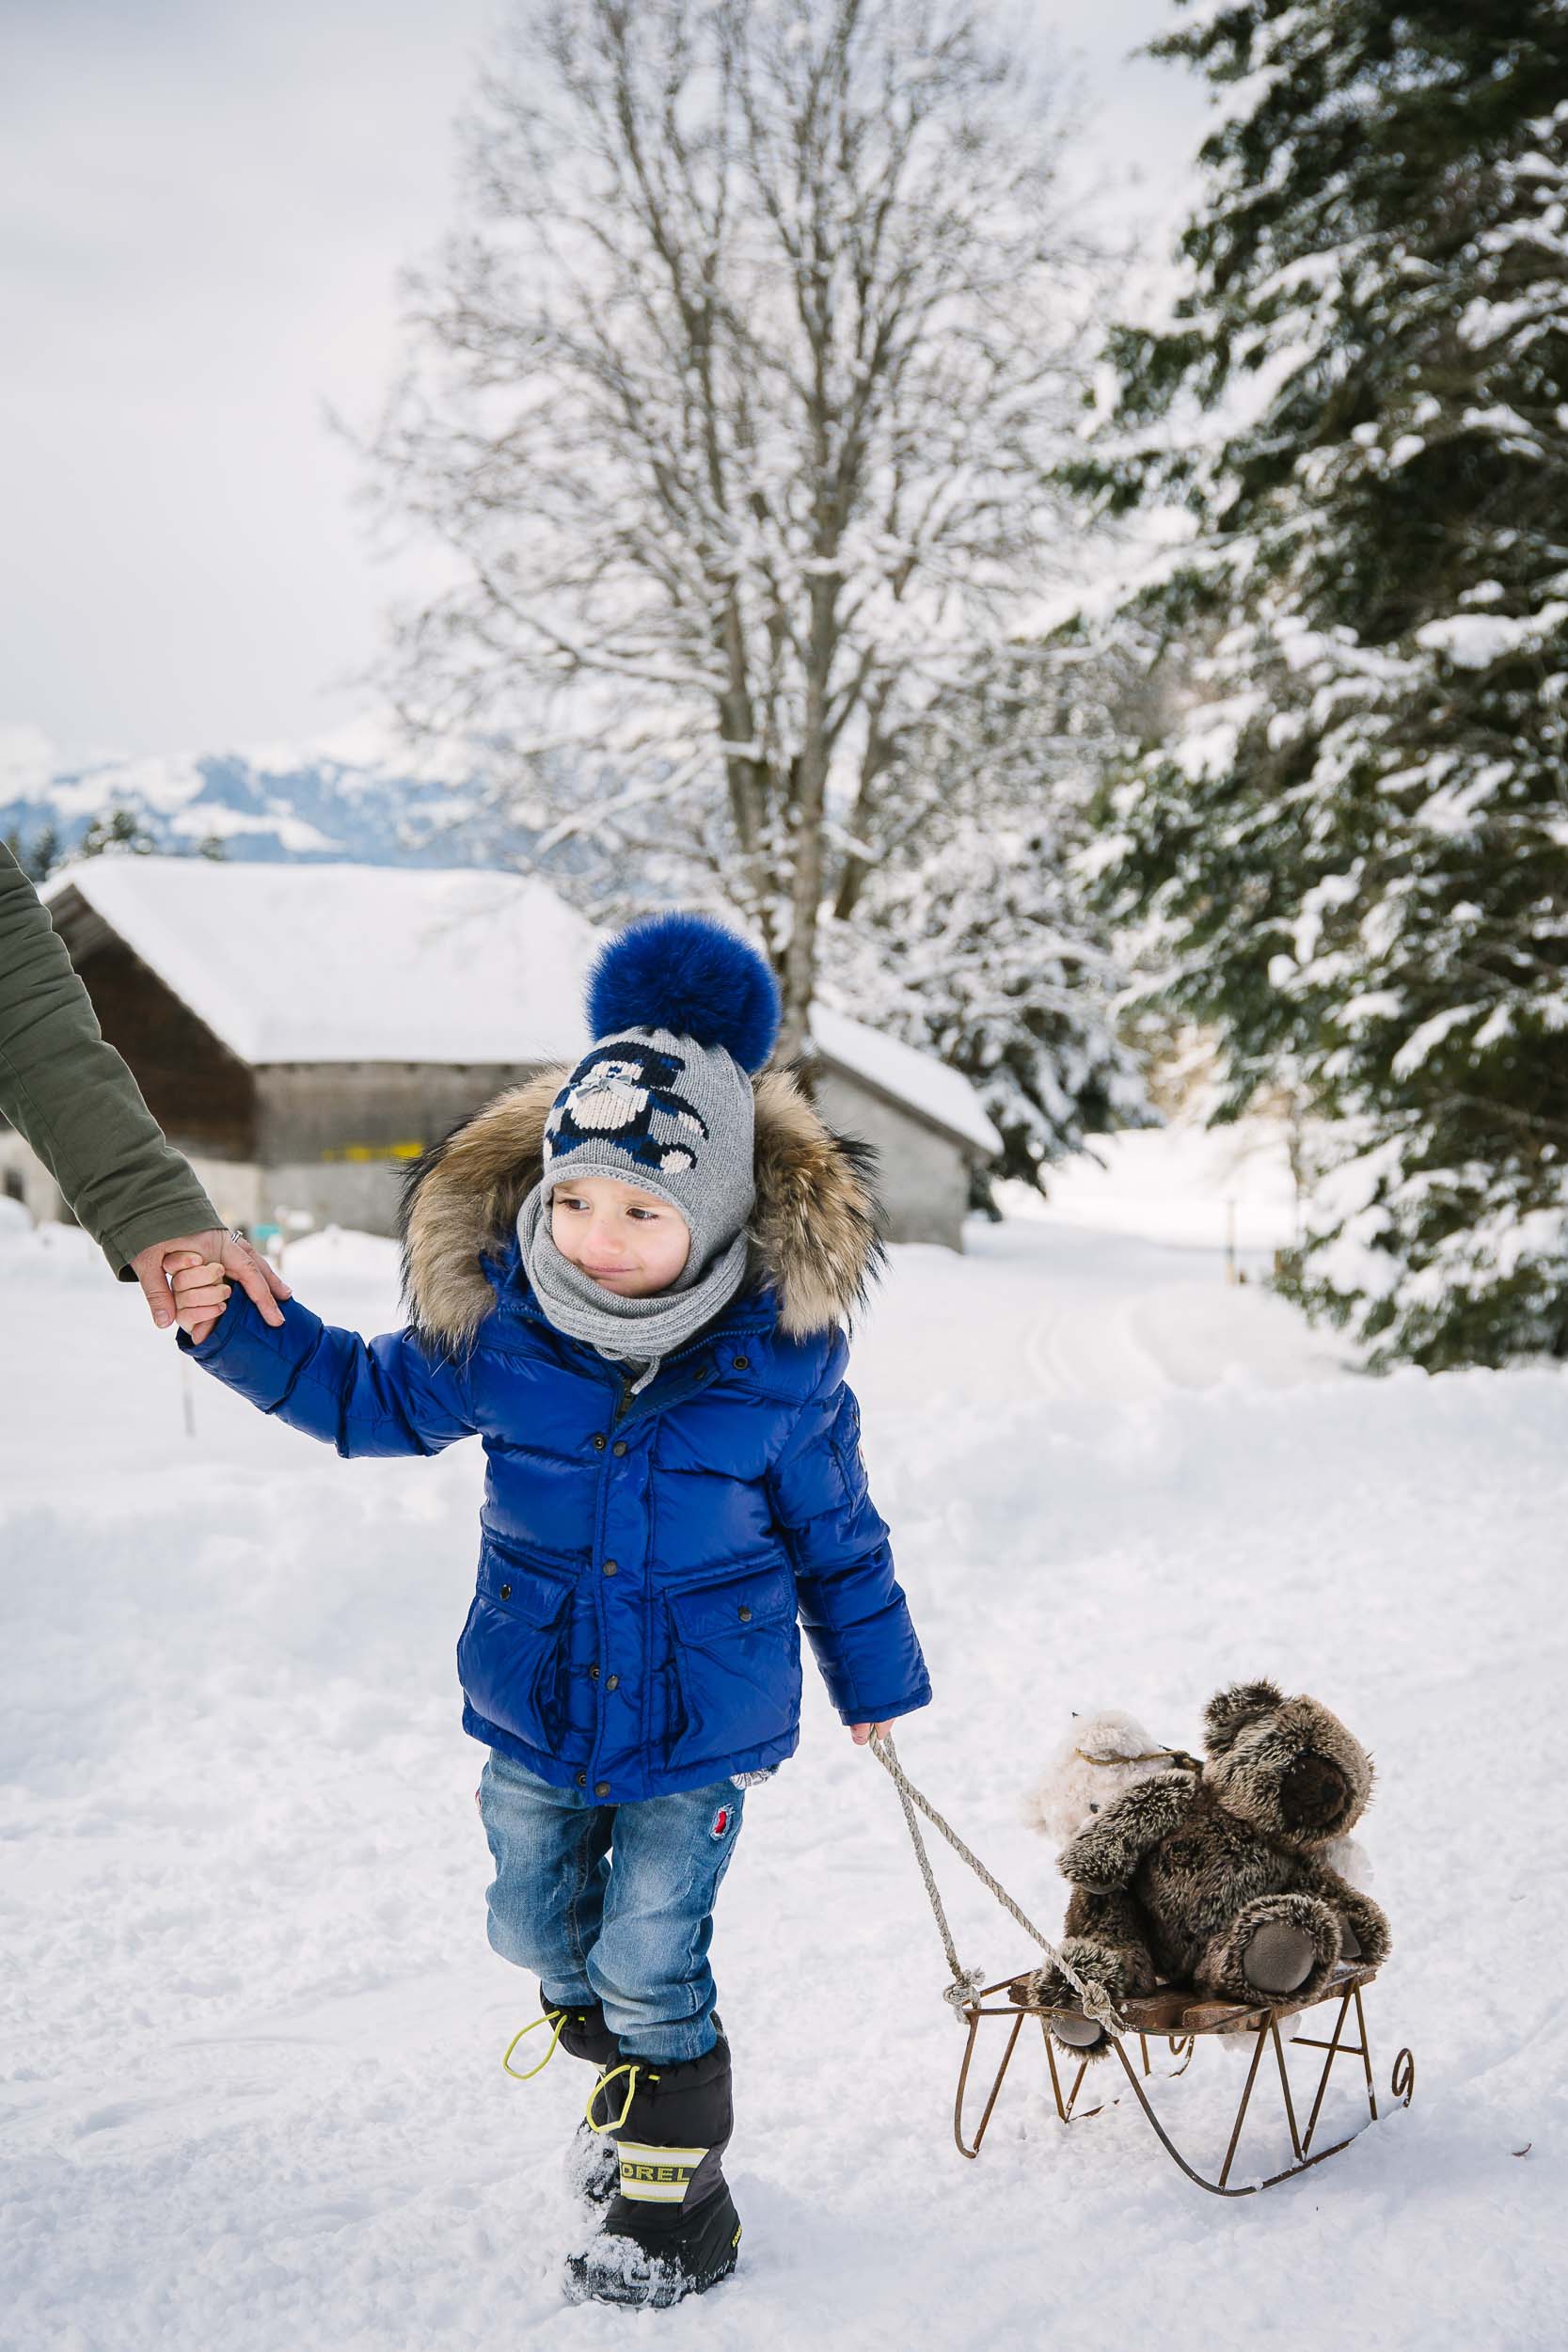 Winter family photos | Tips for getting the best snow pics